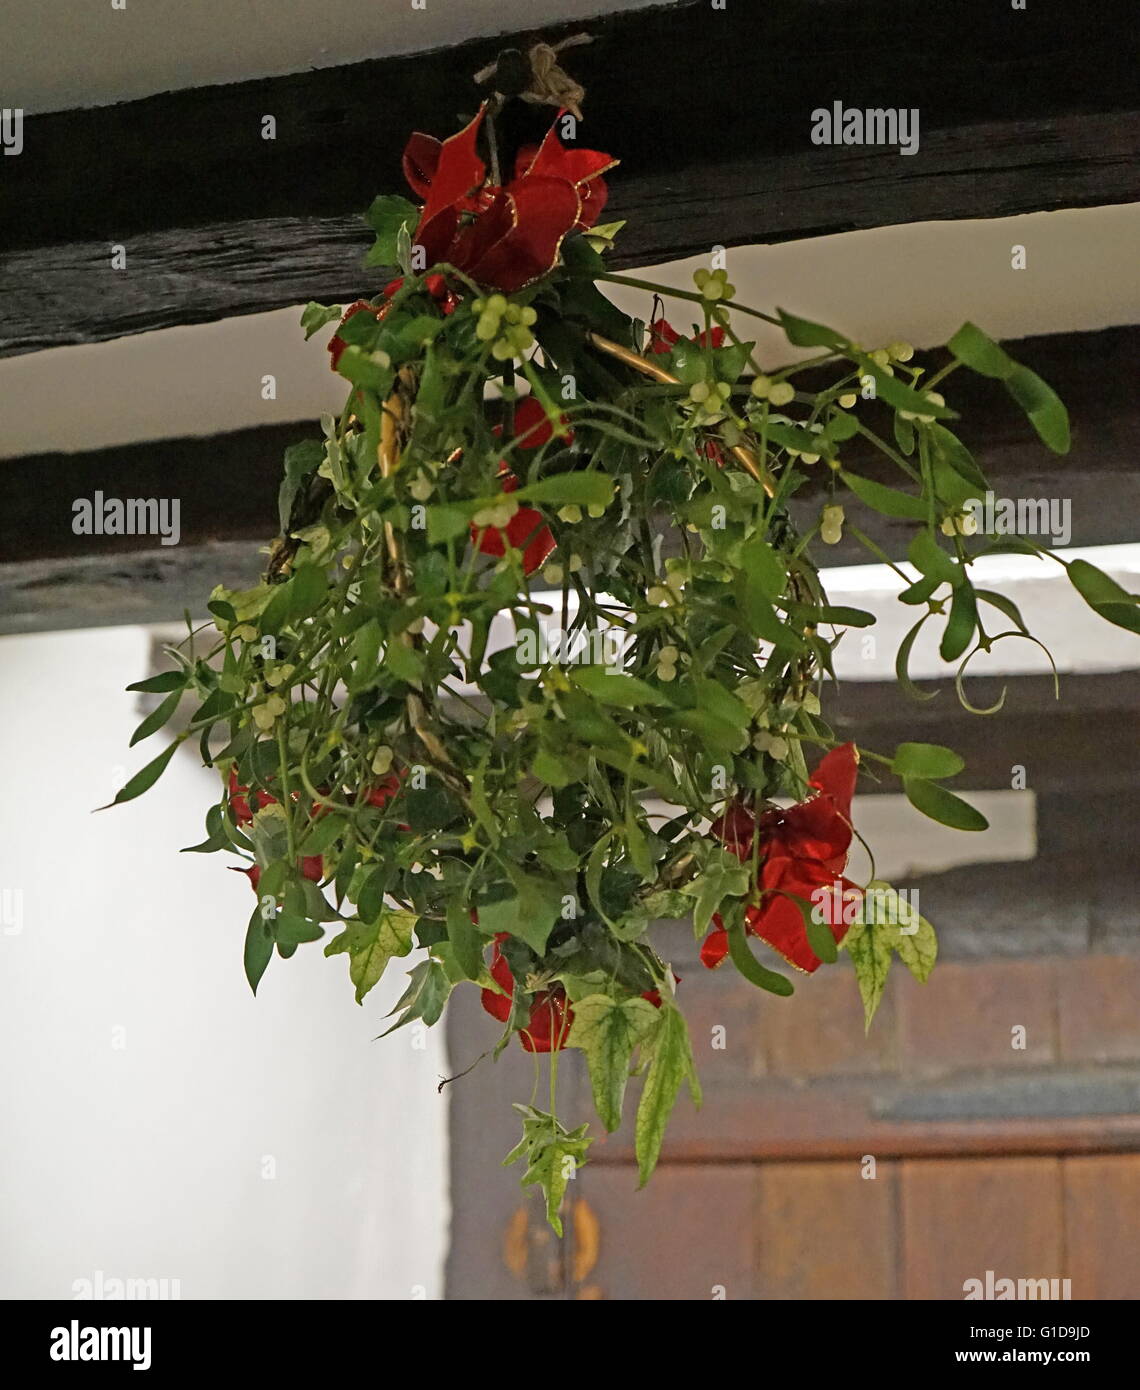 The Tradition of Mistletoe at Christmas. Mistletoe is a plant that grows on willow and apple trees (and in garden centres!). The tradition of hanging it in the house goes back to the times of the ancient Druids. It is supposed to possess mystical powers which bring good luck to the household and wards off evil spirits Stock Photo